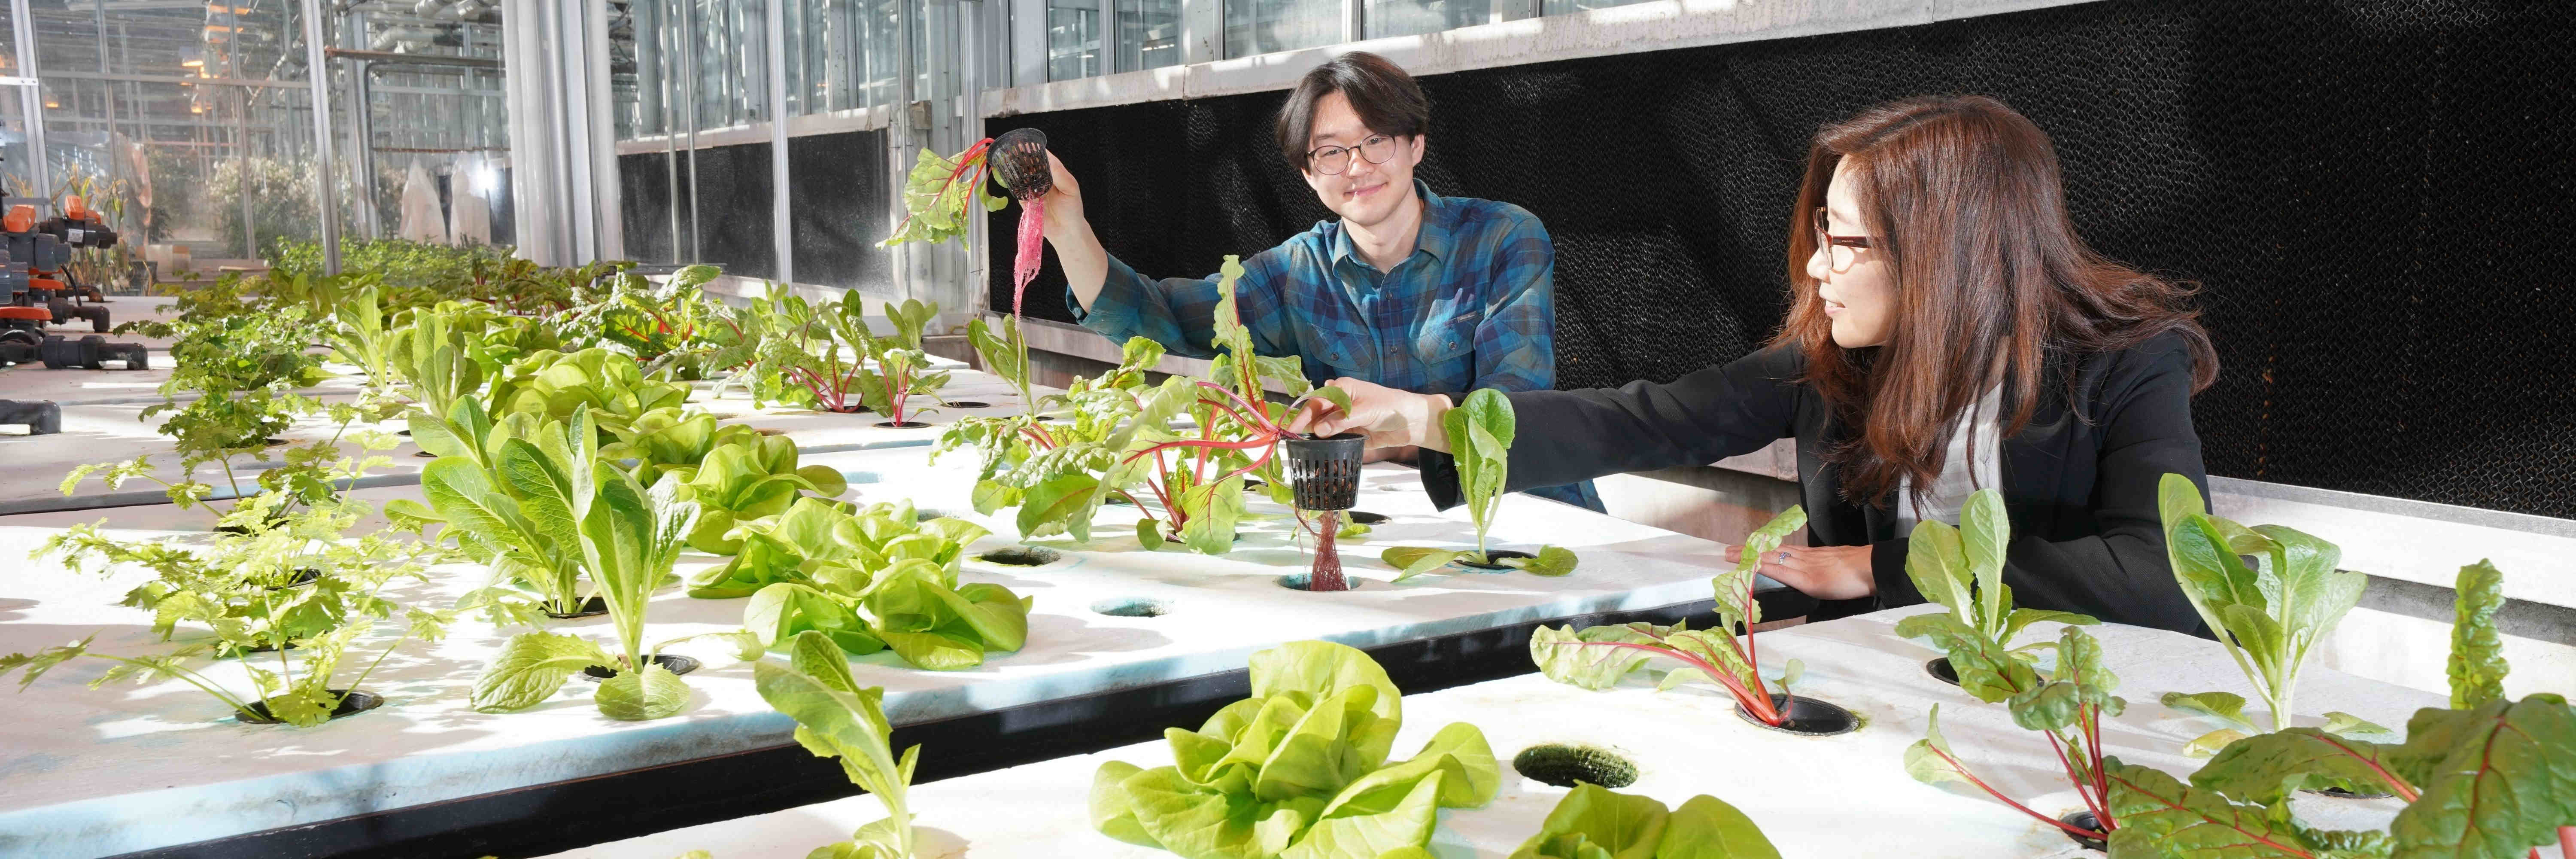 horticulture image of people in a field house